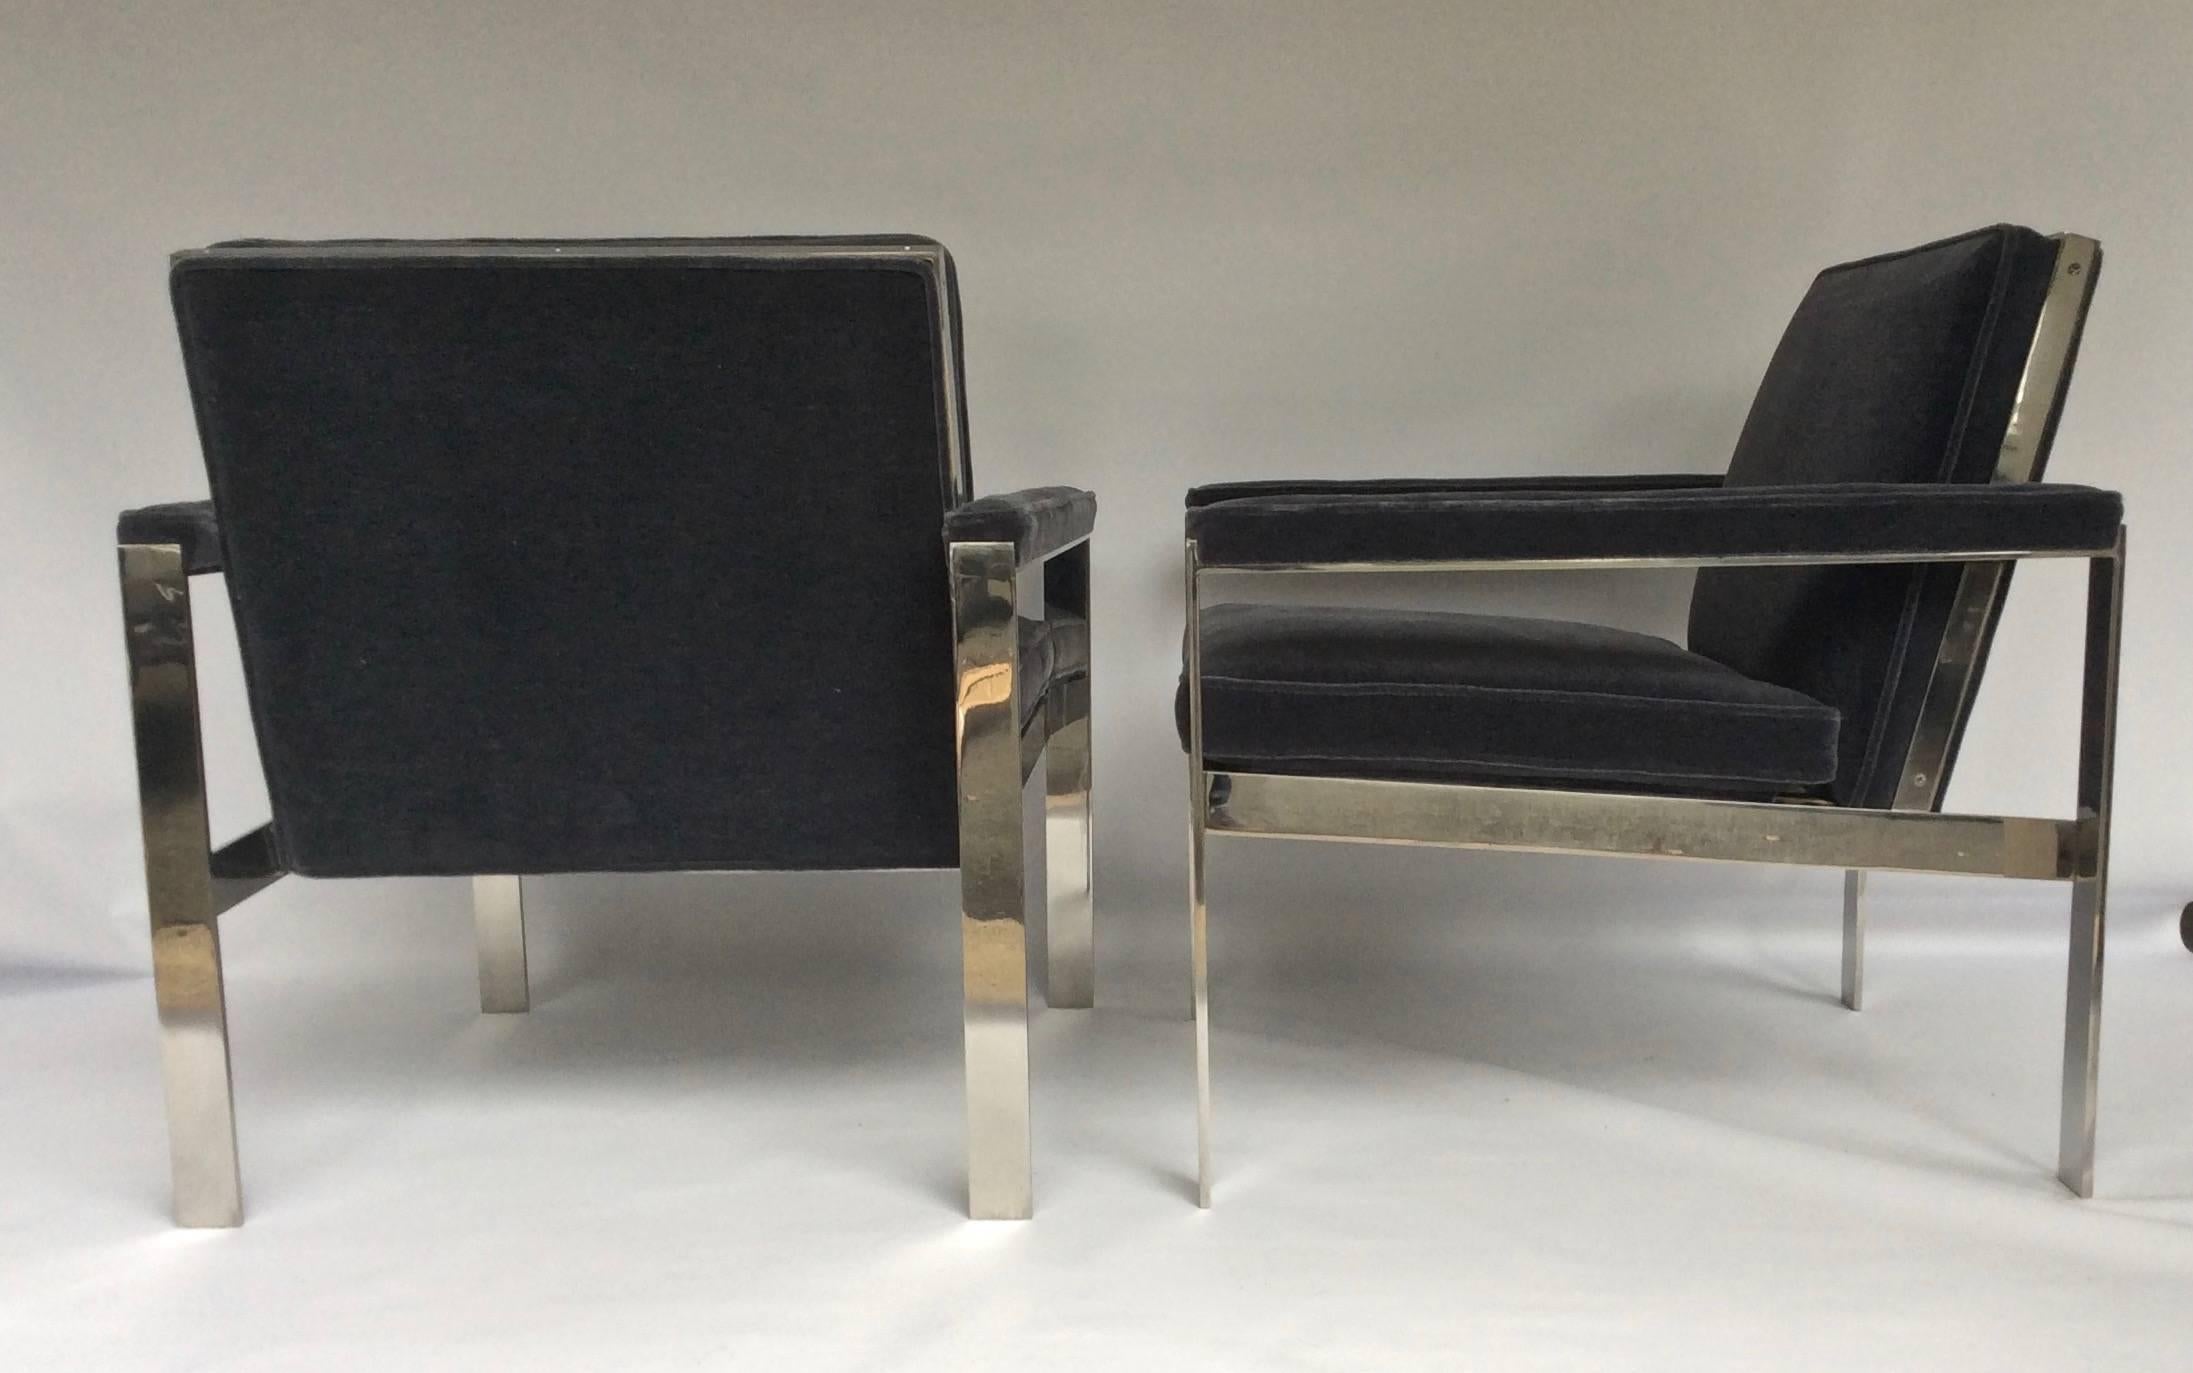 Polished 1970s Knoll/ Milo Baughman Pair of Chrome and Mohair Lounge Chairs For Sale